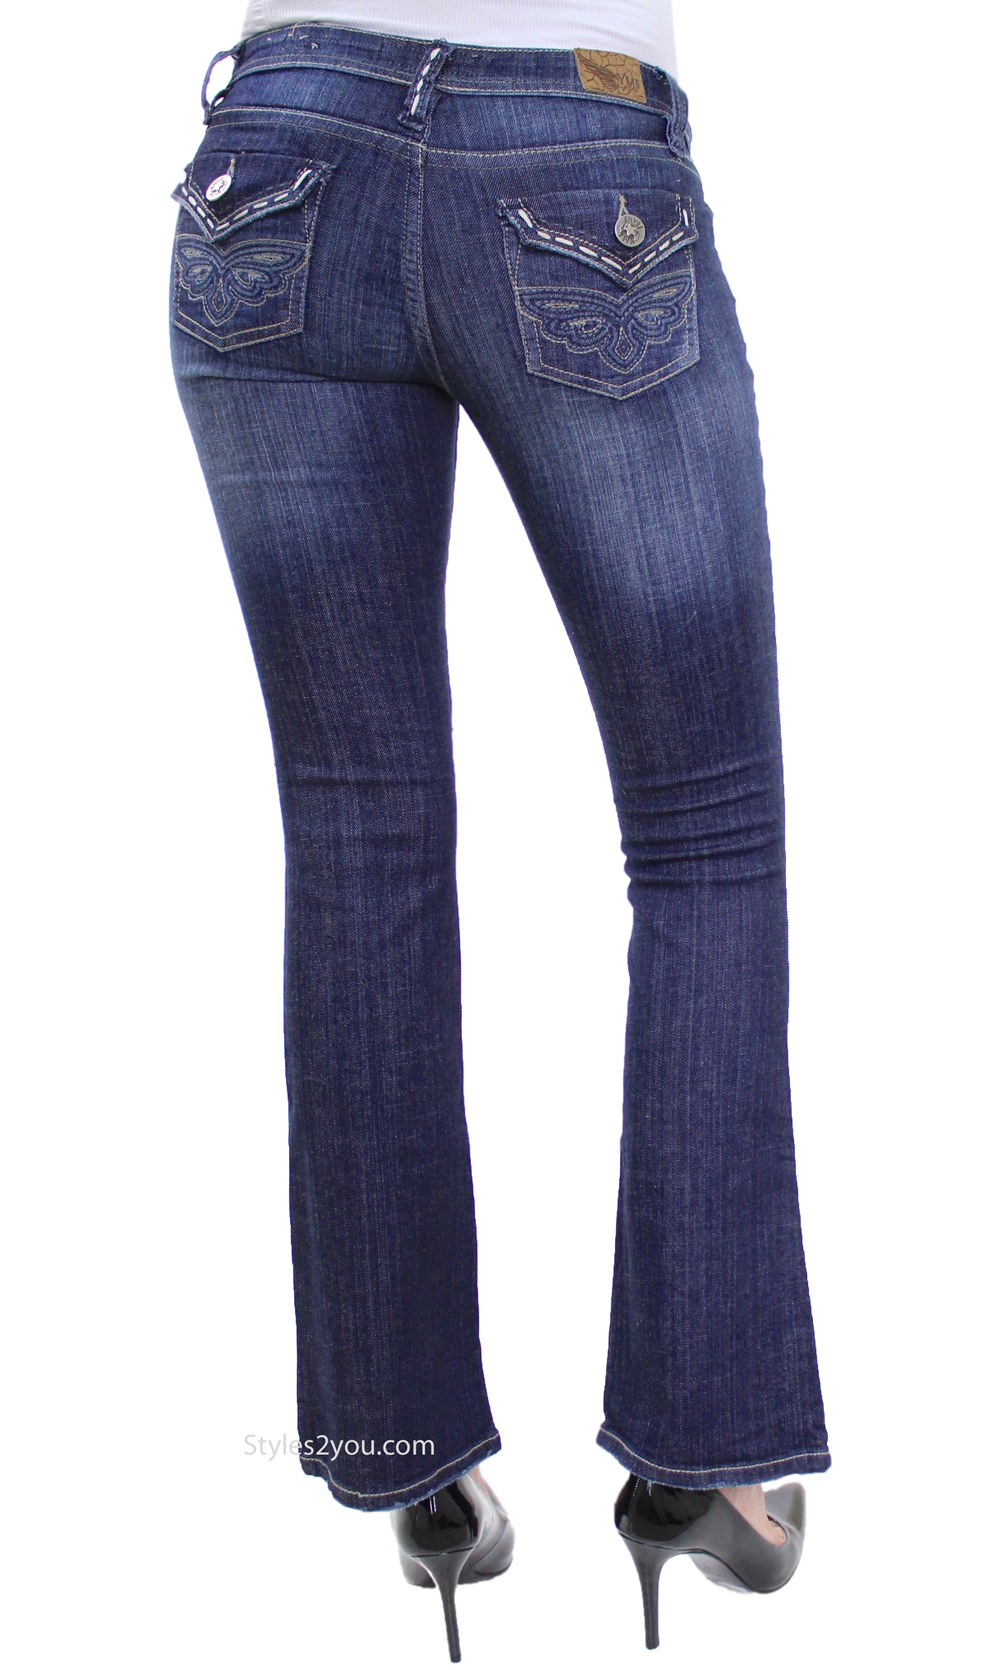 Laila YMI Bootcut Denim Jeans With Embroidered Pockets [P354310-S187 YMI  Jeans Bootcut] - $59.00